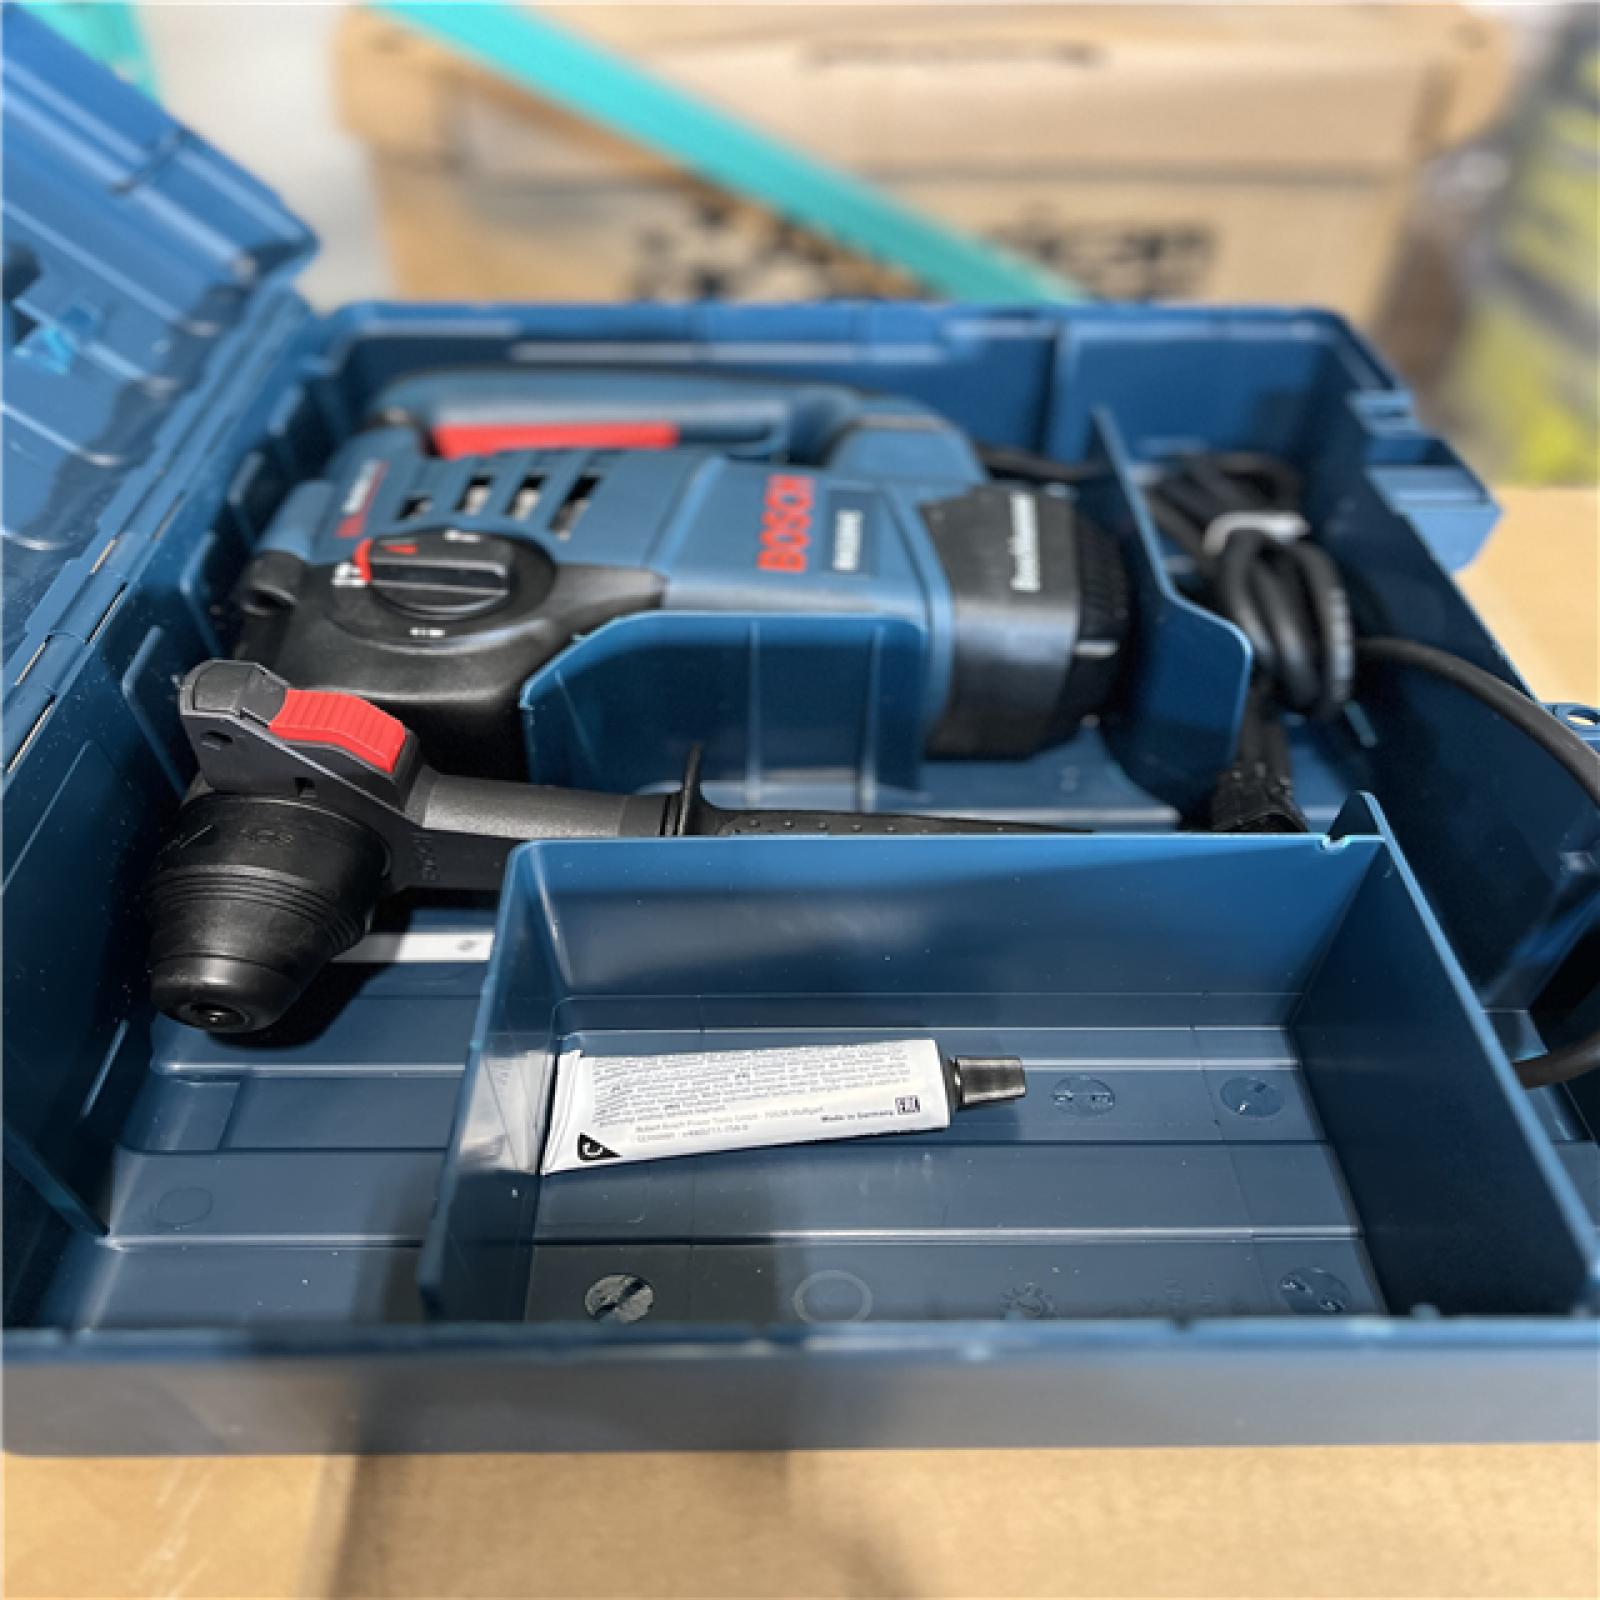 NEW! - Bosch 8 Amp 1-1/8 in. Corded Variable Speed SDS-Plus Concrete/Masonry Rotary Hammer Drill with Depth Gauge and Carrying Case